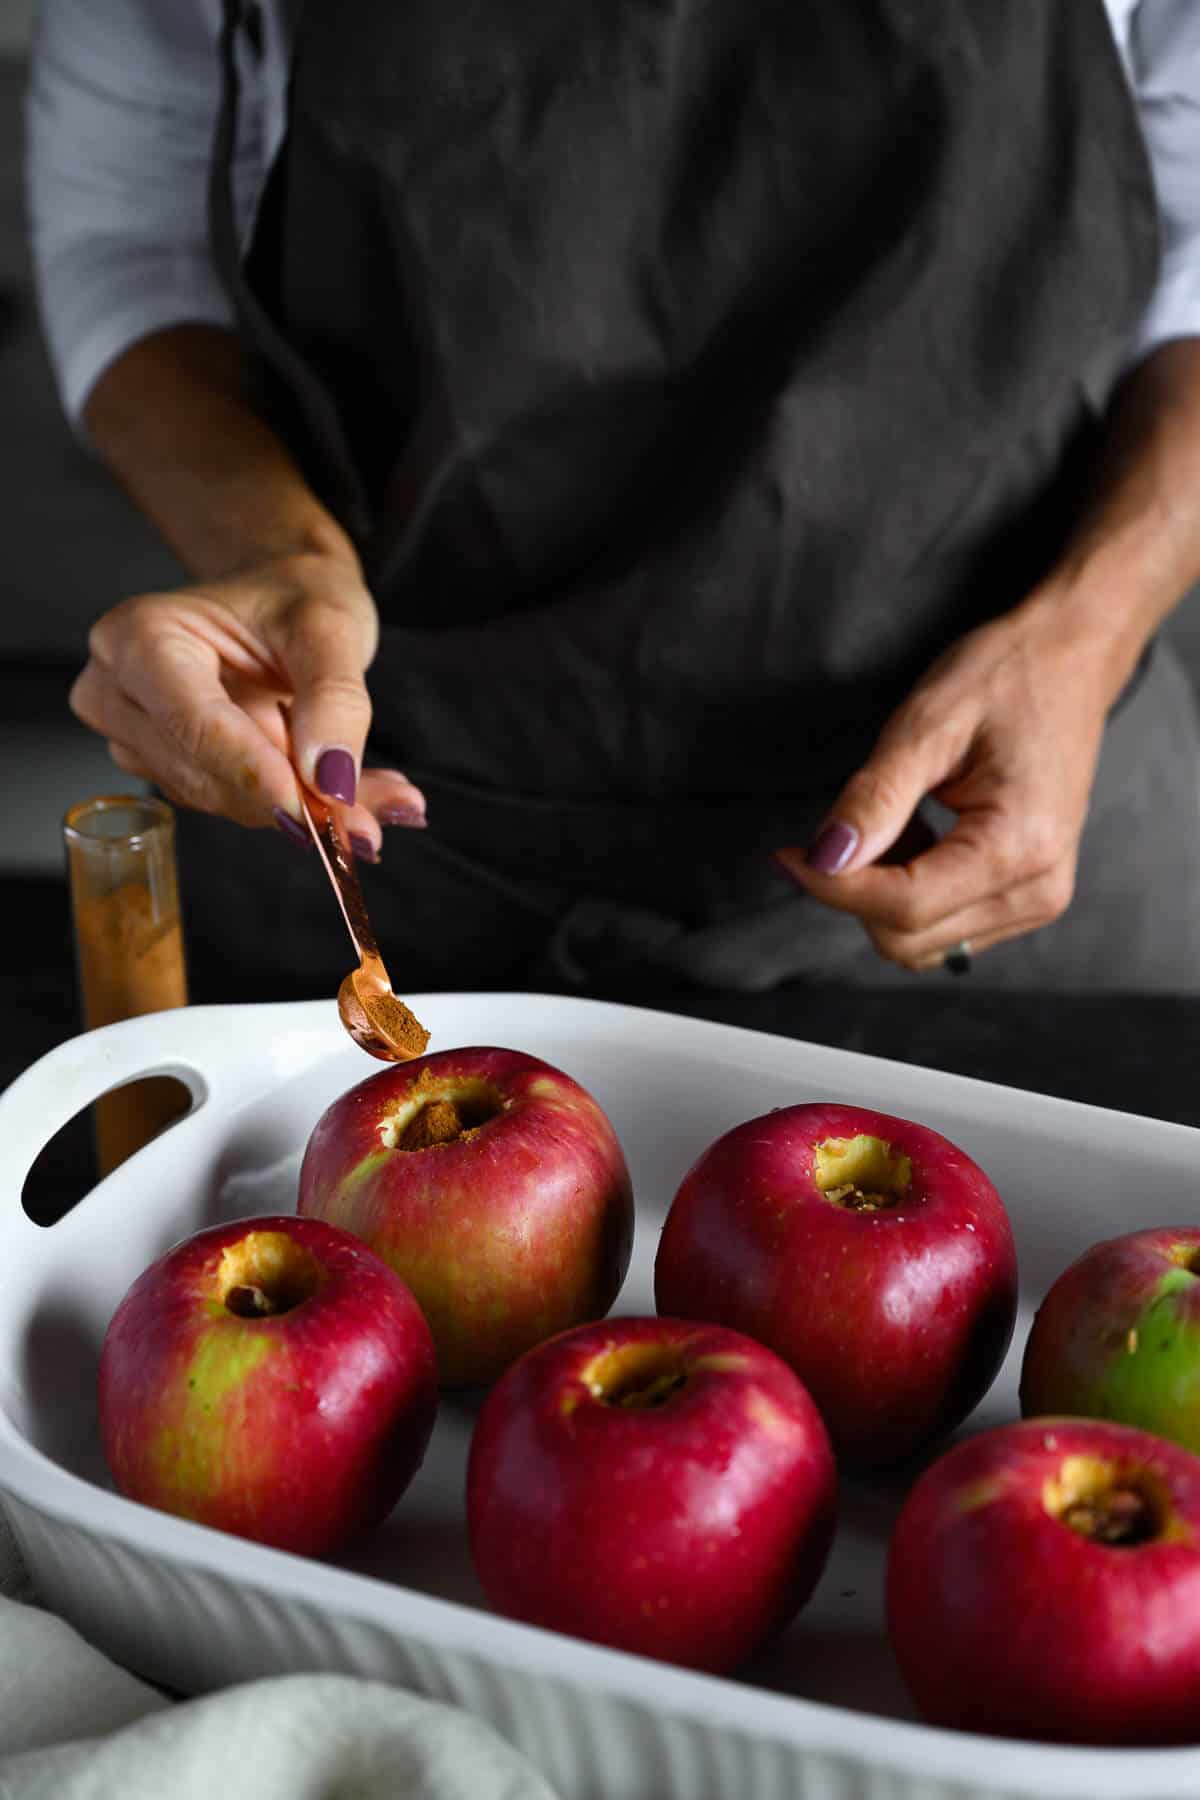 woman sprinkling cinnamon over whole cored apples for baking.